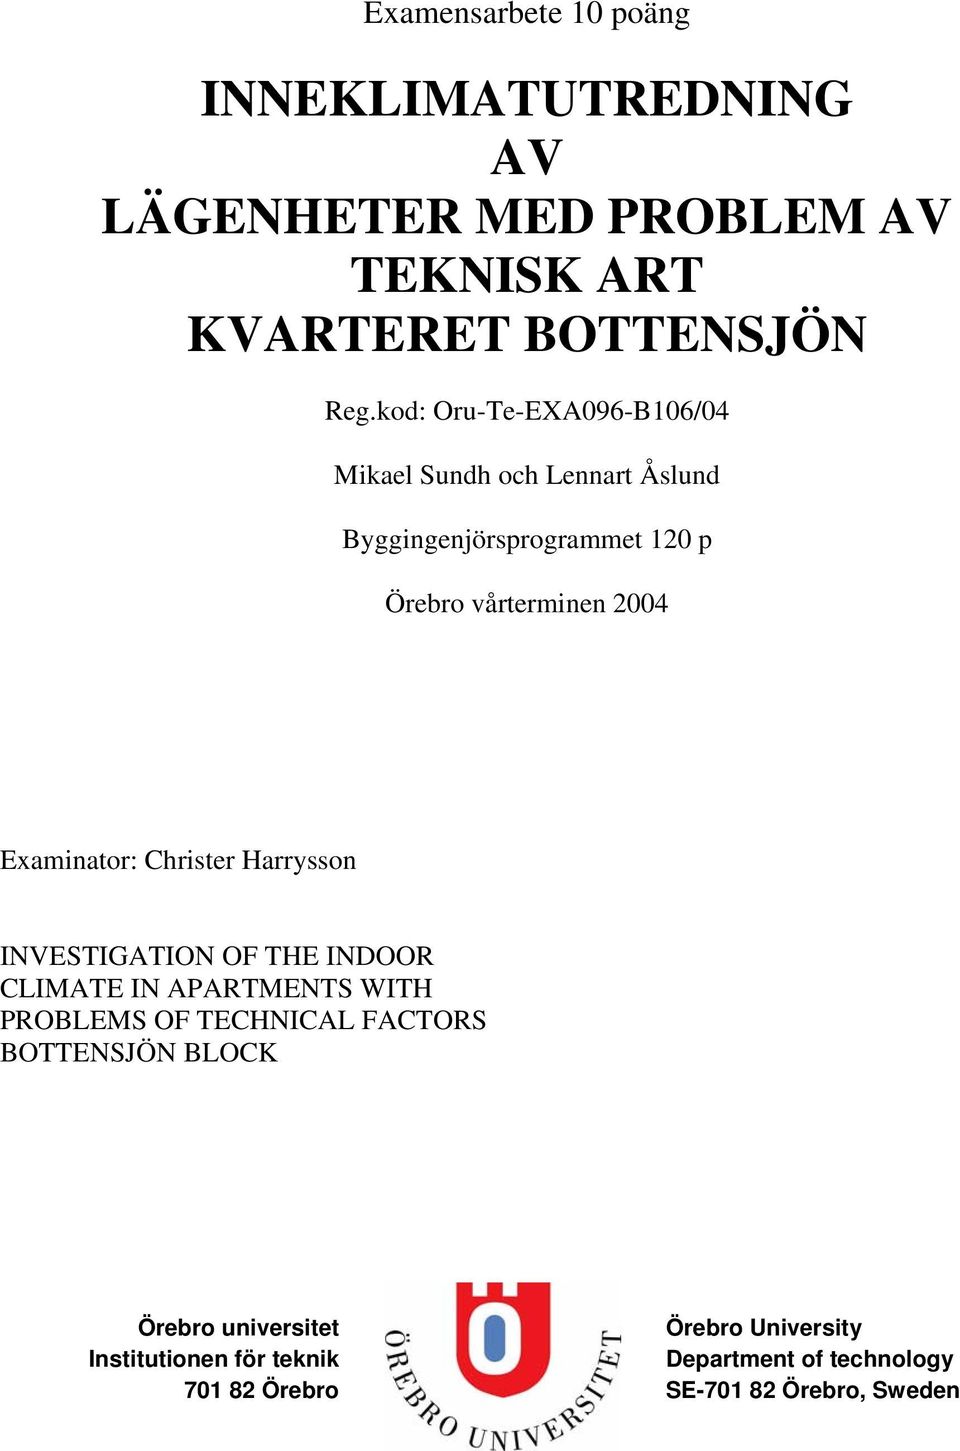 Examinator: Christer Harrysson INVESTIGATION OF THE INDOOR CLIMATE IN APARTMENTS WITH PROBLEMS OF TECHNICAL FACTORS